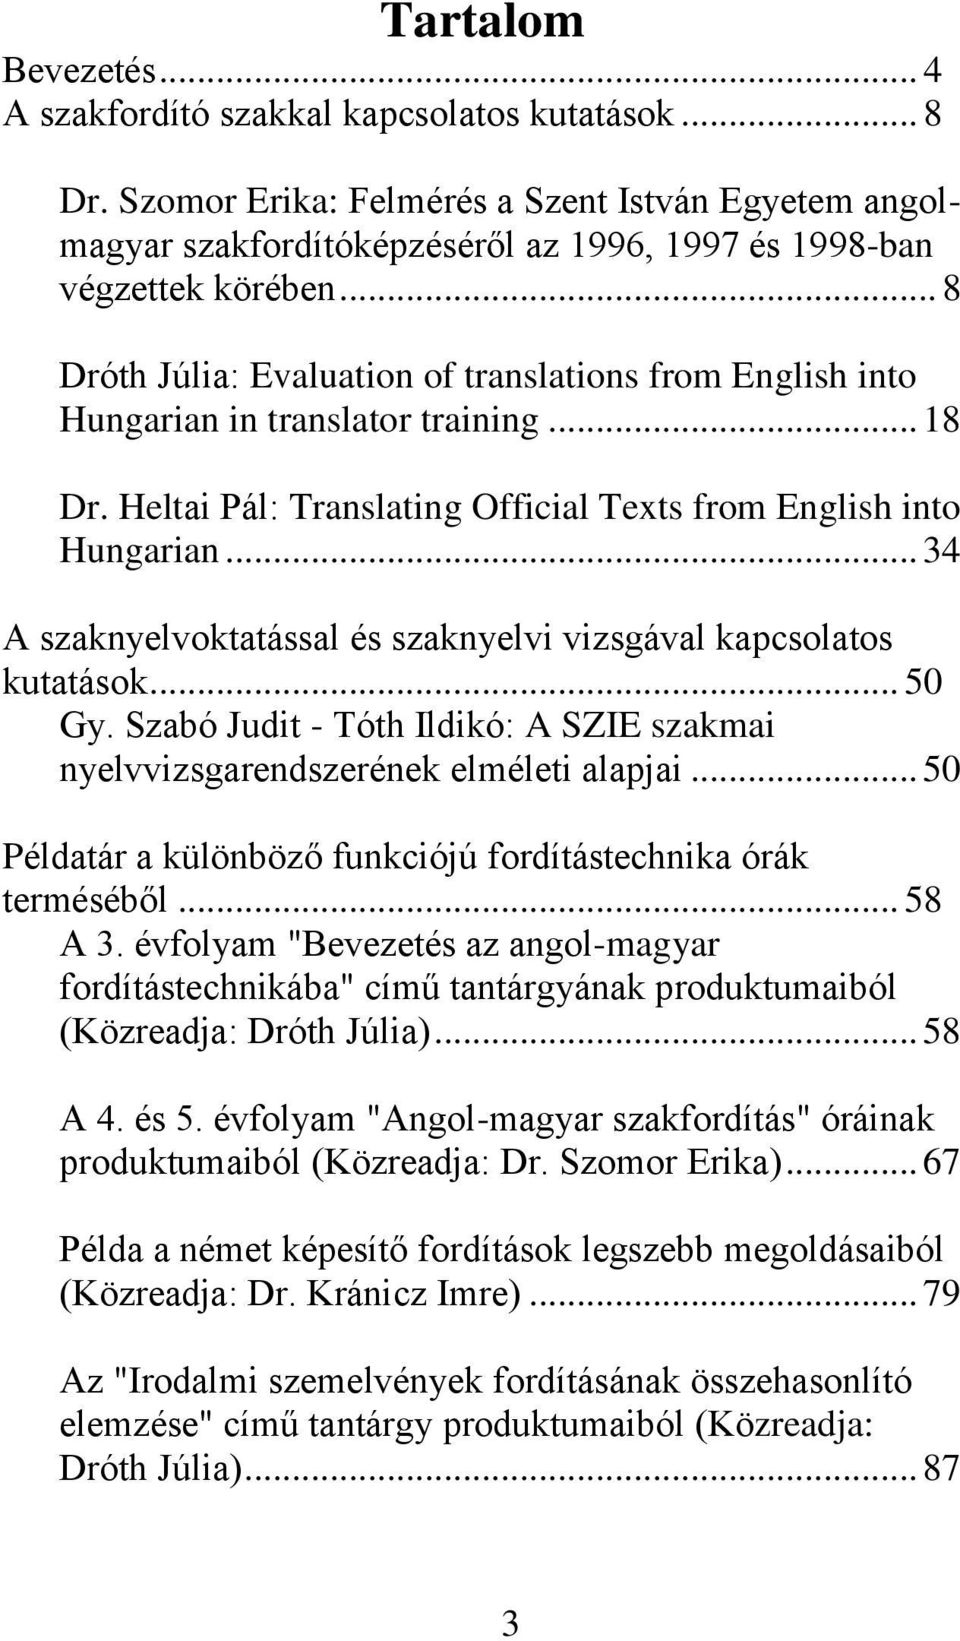 .. 8 Dróth Júlia: Evaluation of translations from English into Hungarian in translator training... 18 Dr. Heltai Pál: Translating Official Texts from English into Hungarian.